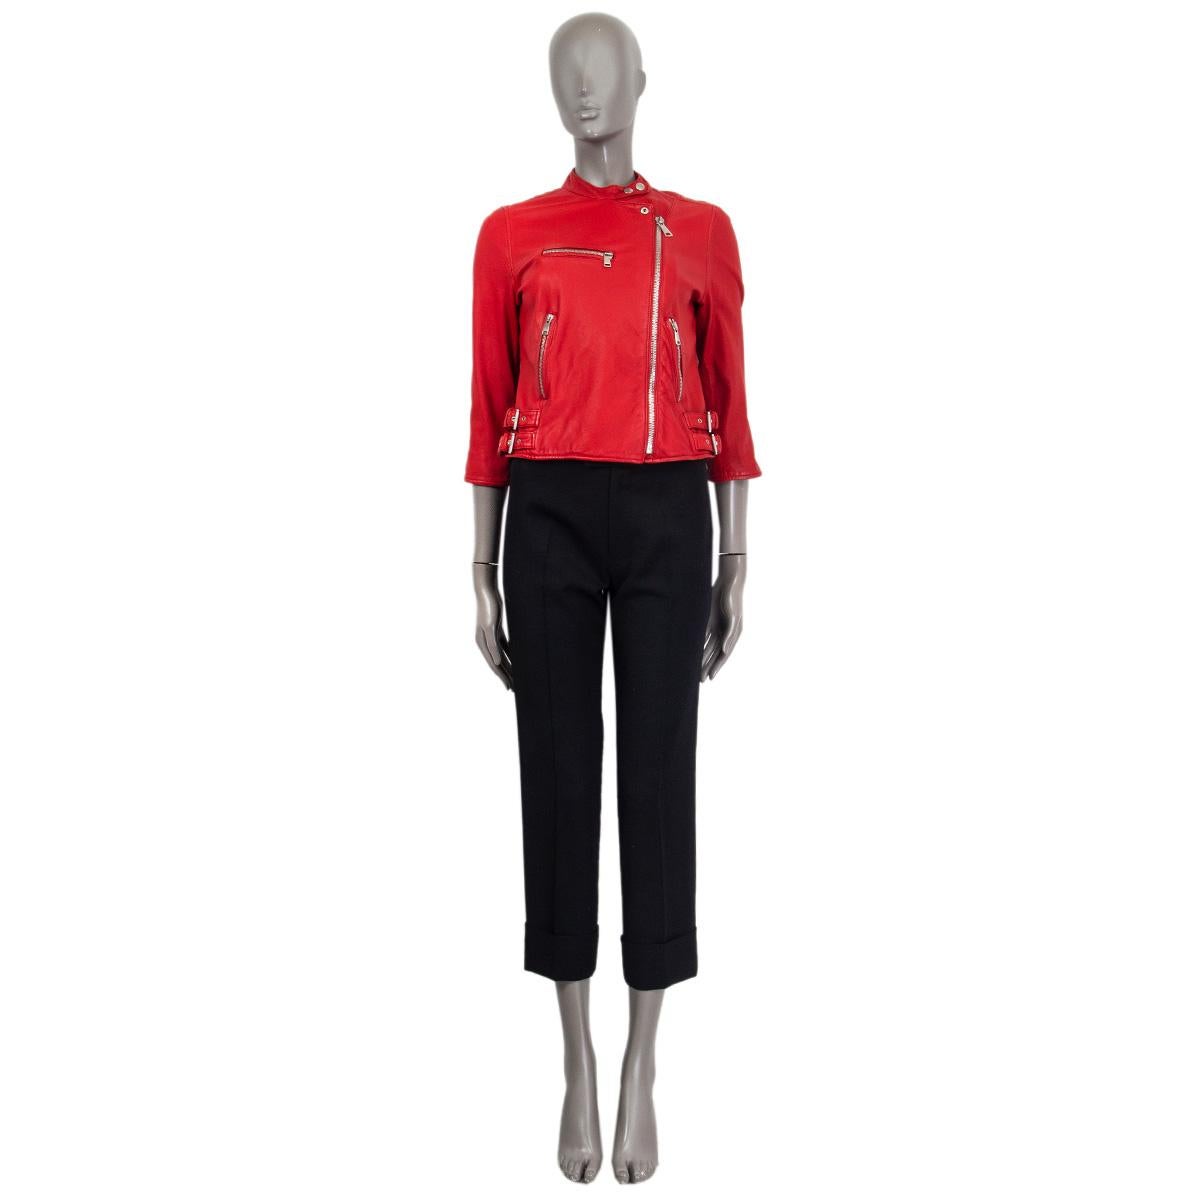 100% authentic Dolce & Gabbana cropped biker jacket in red lambskin (100%). Embellished with zippers at the cuffs, three zip pockets at the front and two buckles on each side. Opens with a silver metal zipper at the front and two snap buttons at the